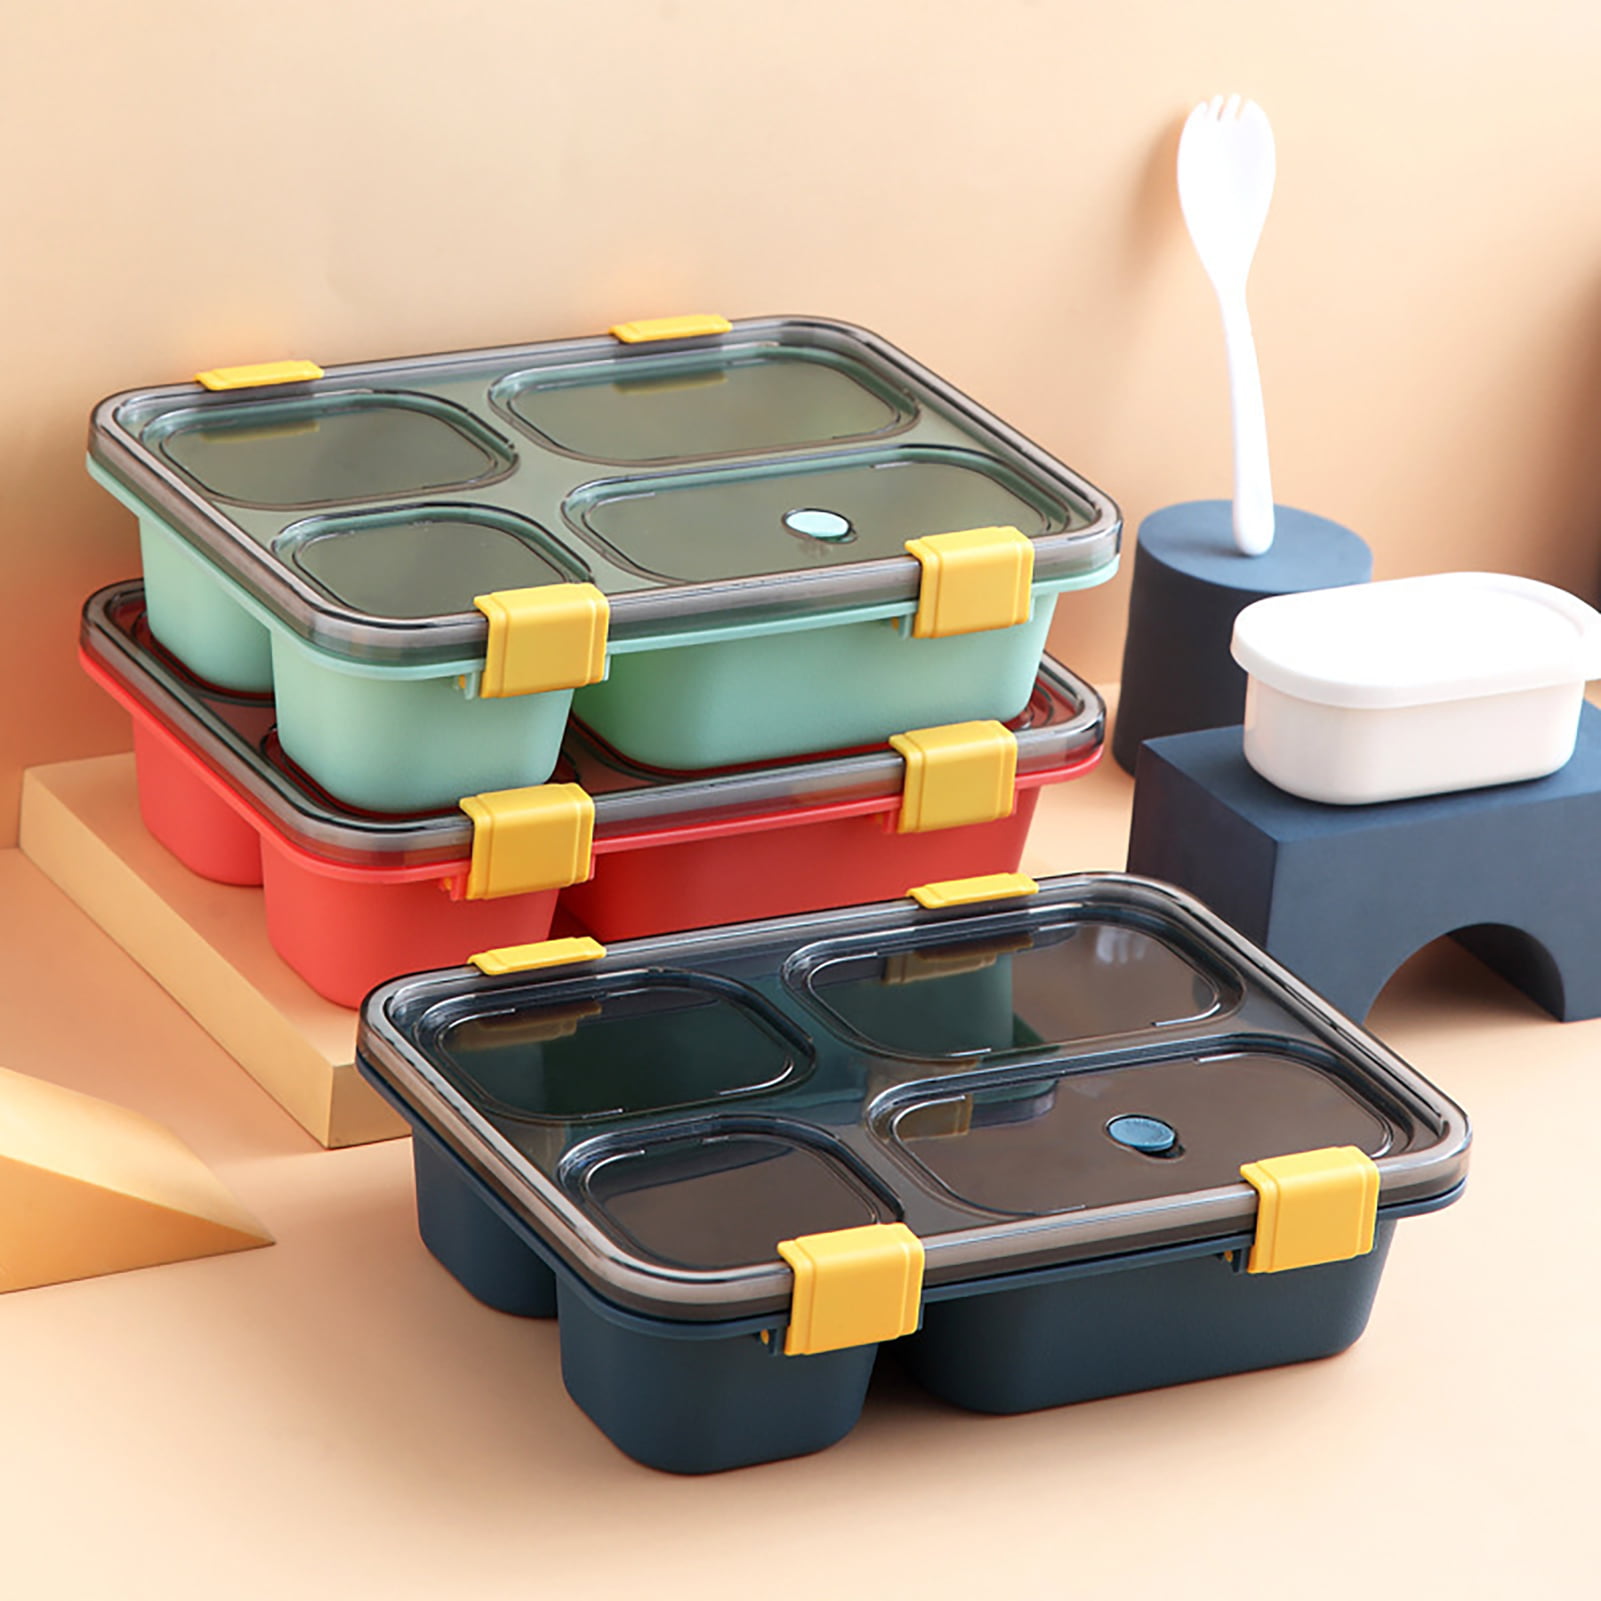 JAYEEY 37 OZ 4 Compartments disposable plates with Lids lunch box bento box  Eco-friendly Plant Fibers Microwave & Freezer Safe 25 PACK